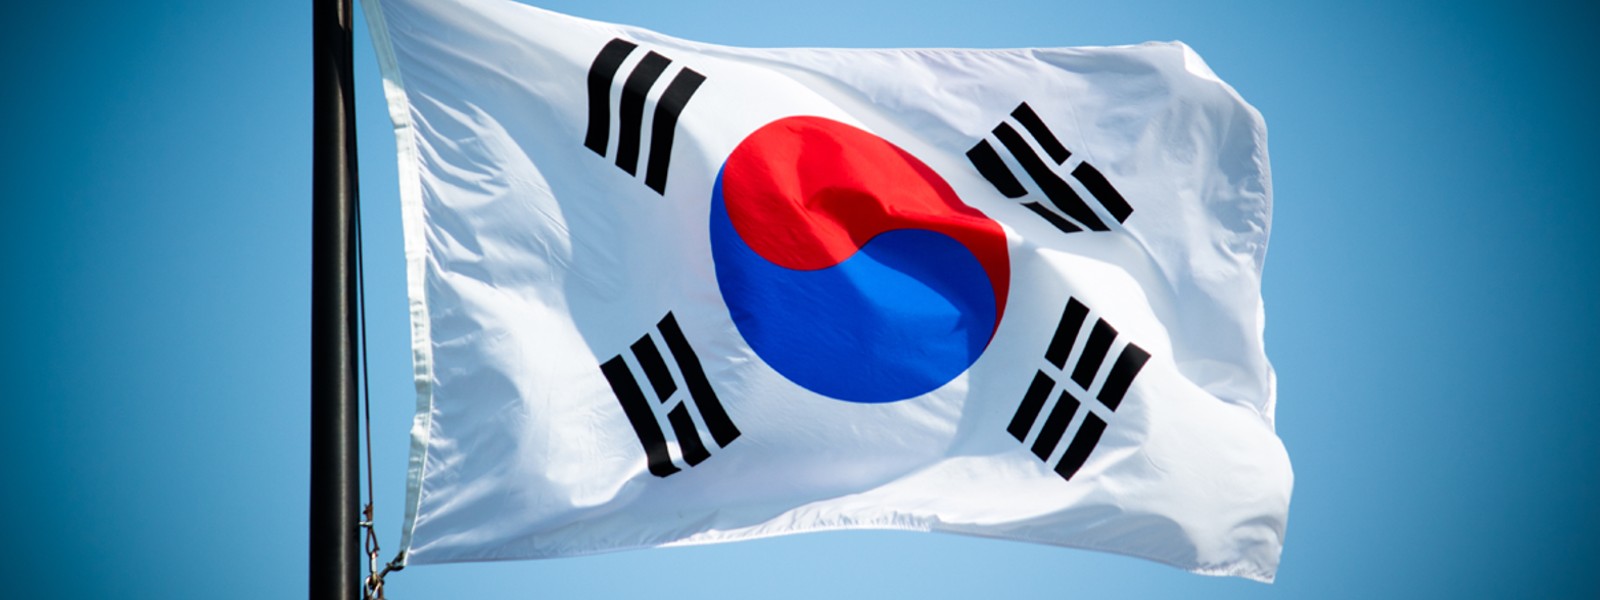 South Korea delivers back-to-back interest rate hikes to combat inflation